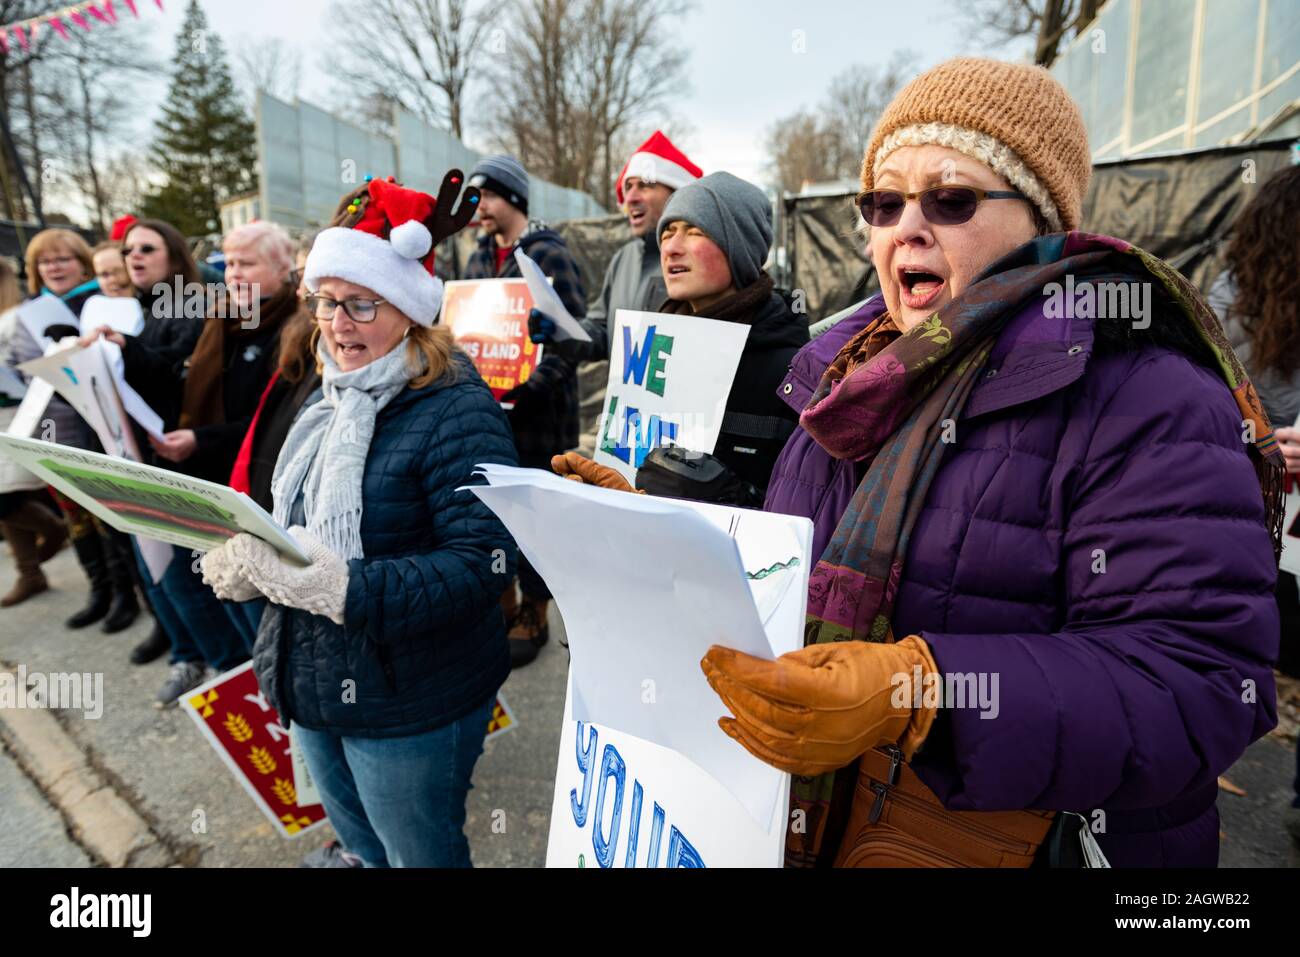 Exton, USA. 21st Dec, 2019. Exton Pennsylvania / USA. About twenty people gathered in suburban Exton Pennsylvania singing Christmas carols with altered lyrics to protest the arrest of two pipeline activists, Mark and Malinda Clatterbuck. Local residents used the Christmas-themed rally to push back on ongoing intimidation by pipeline company Sunoco. Credit: Chris Baker Evens / Alamy Live News. Credit: Christopher Evens/Alamy Live News Stock Photo